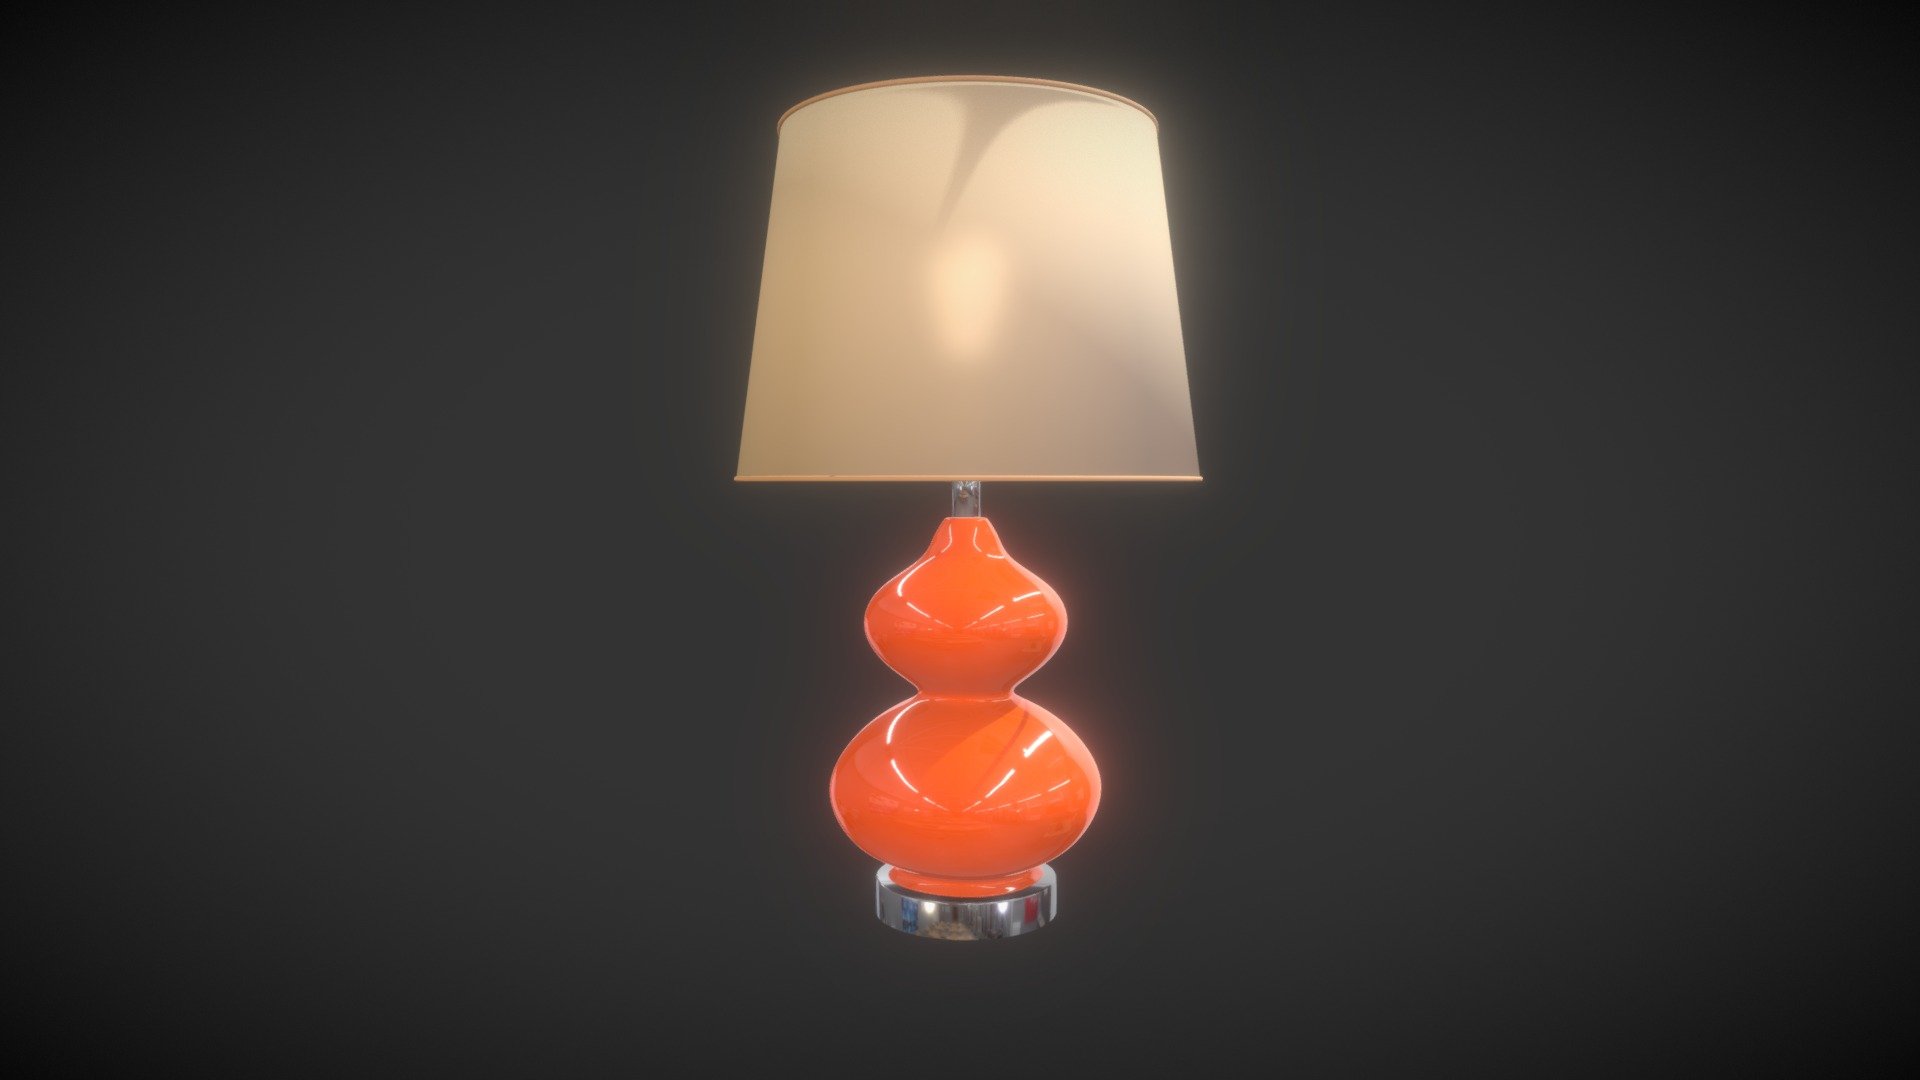 Typical modern table lamp. Blender 2.79a cycles 3d model